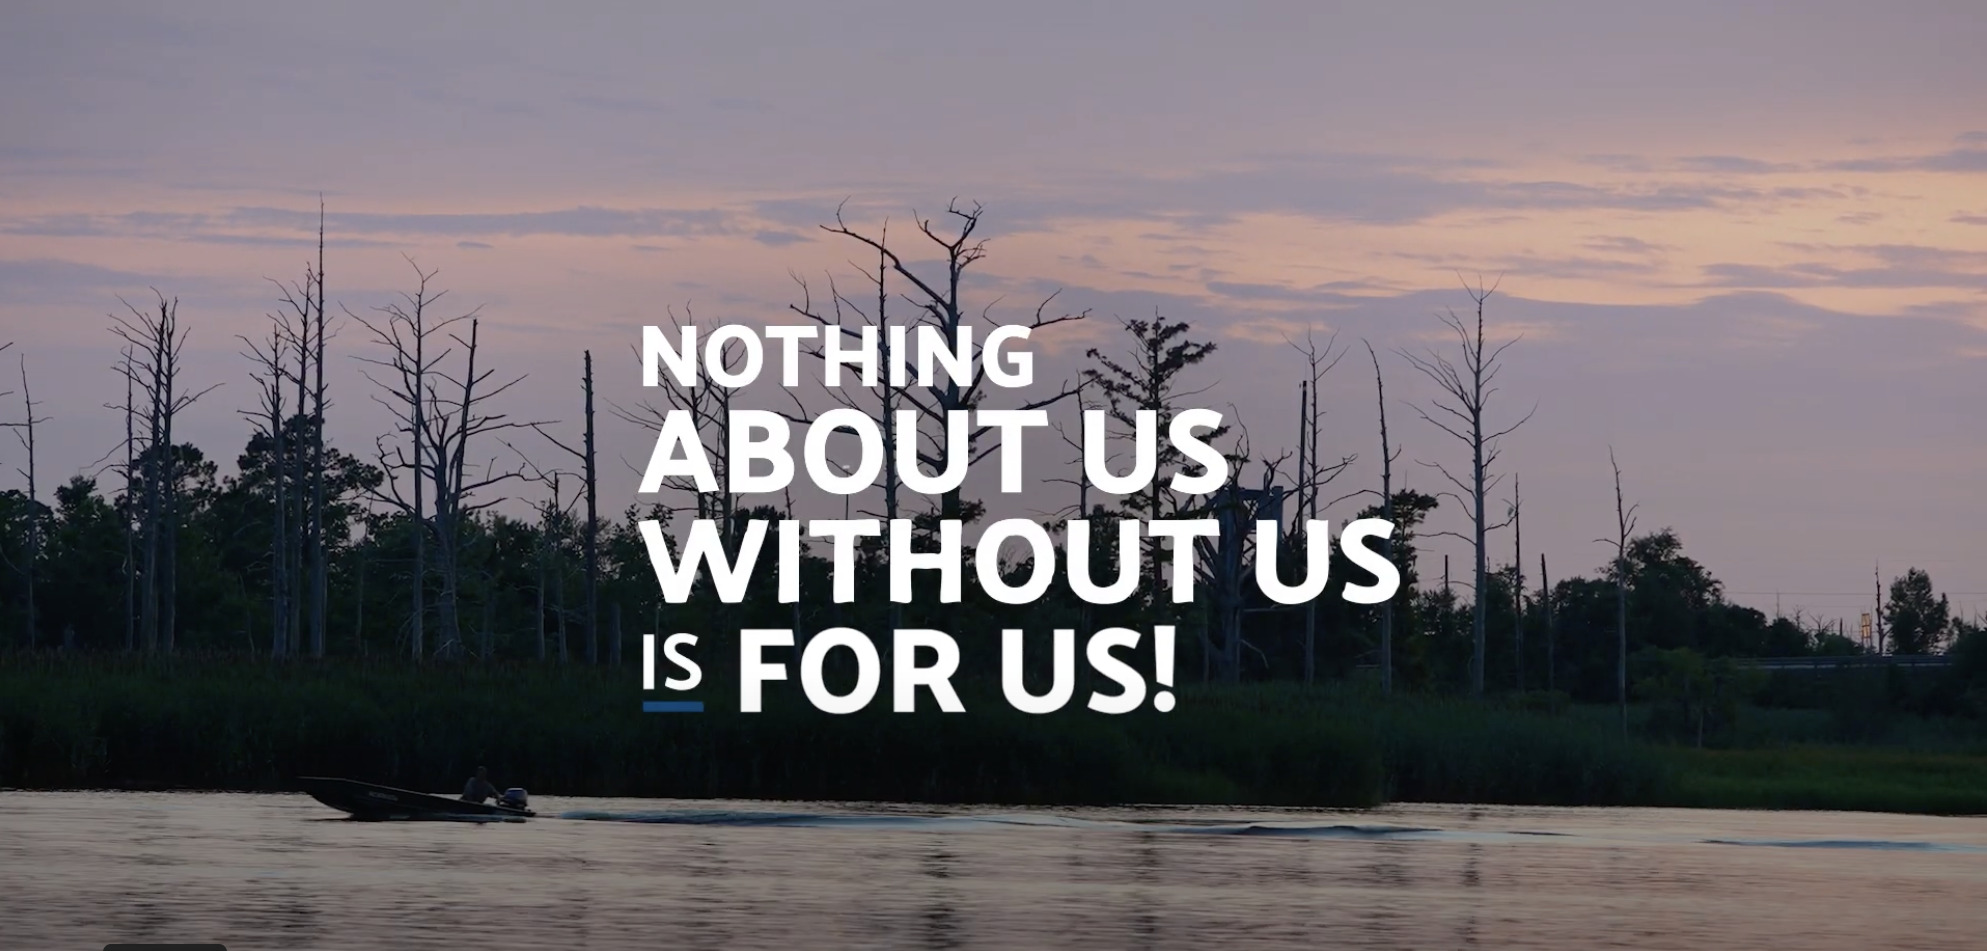 Photo of a lake with a boat at dusk. The title card says "Nothing About Us Without Us Is For Us"